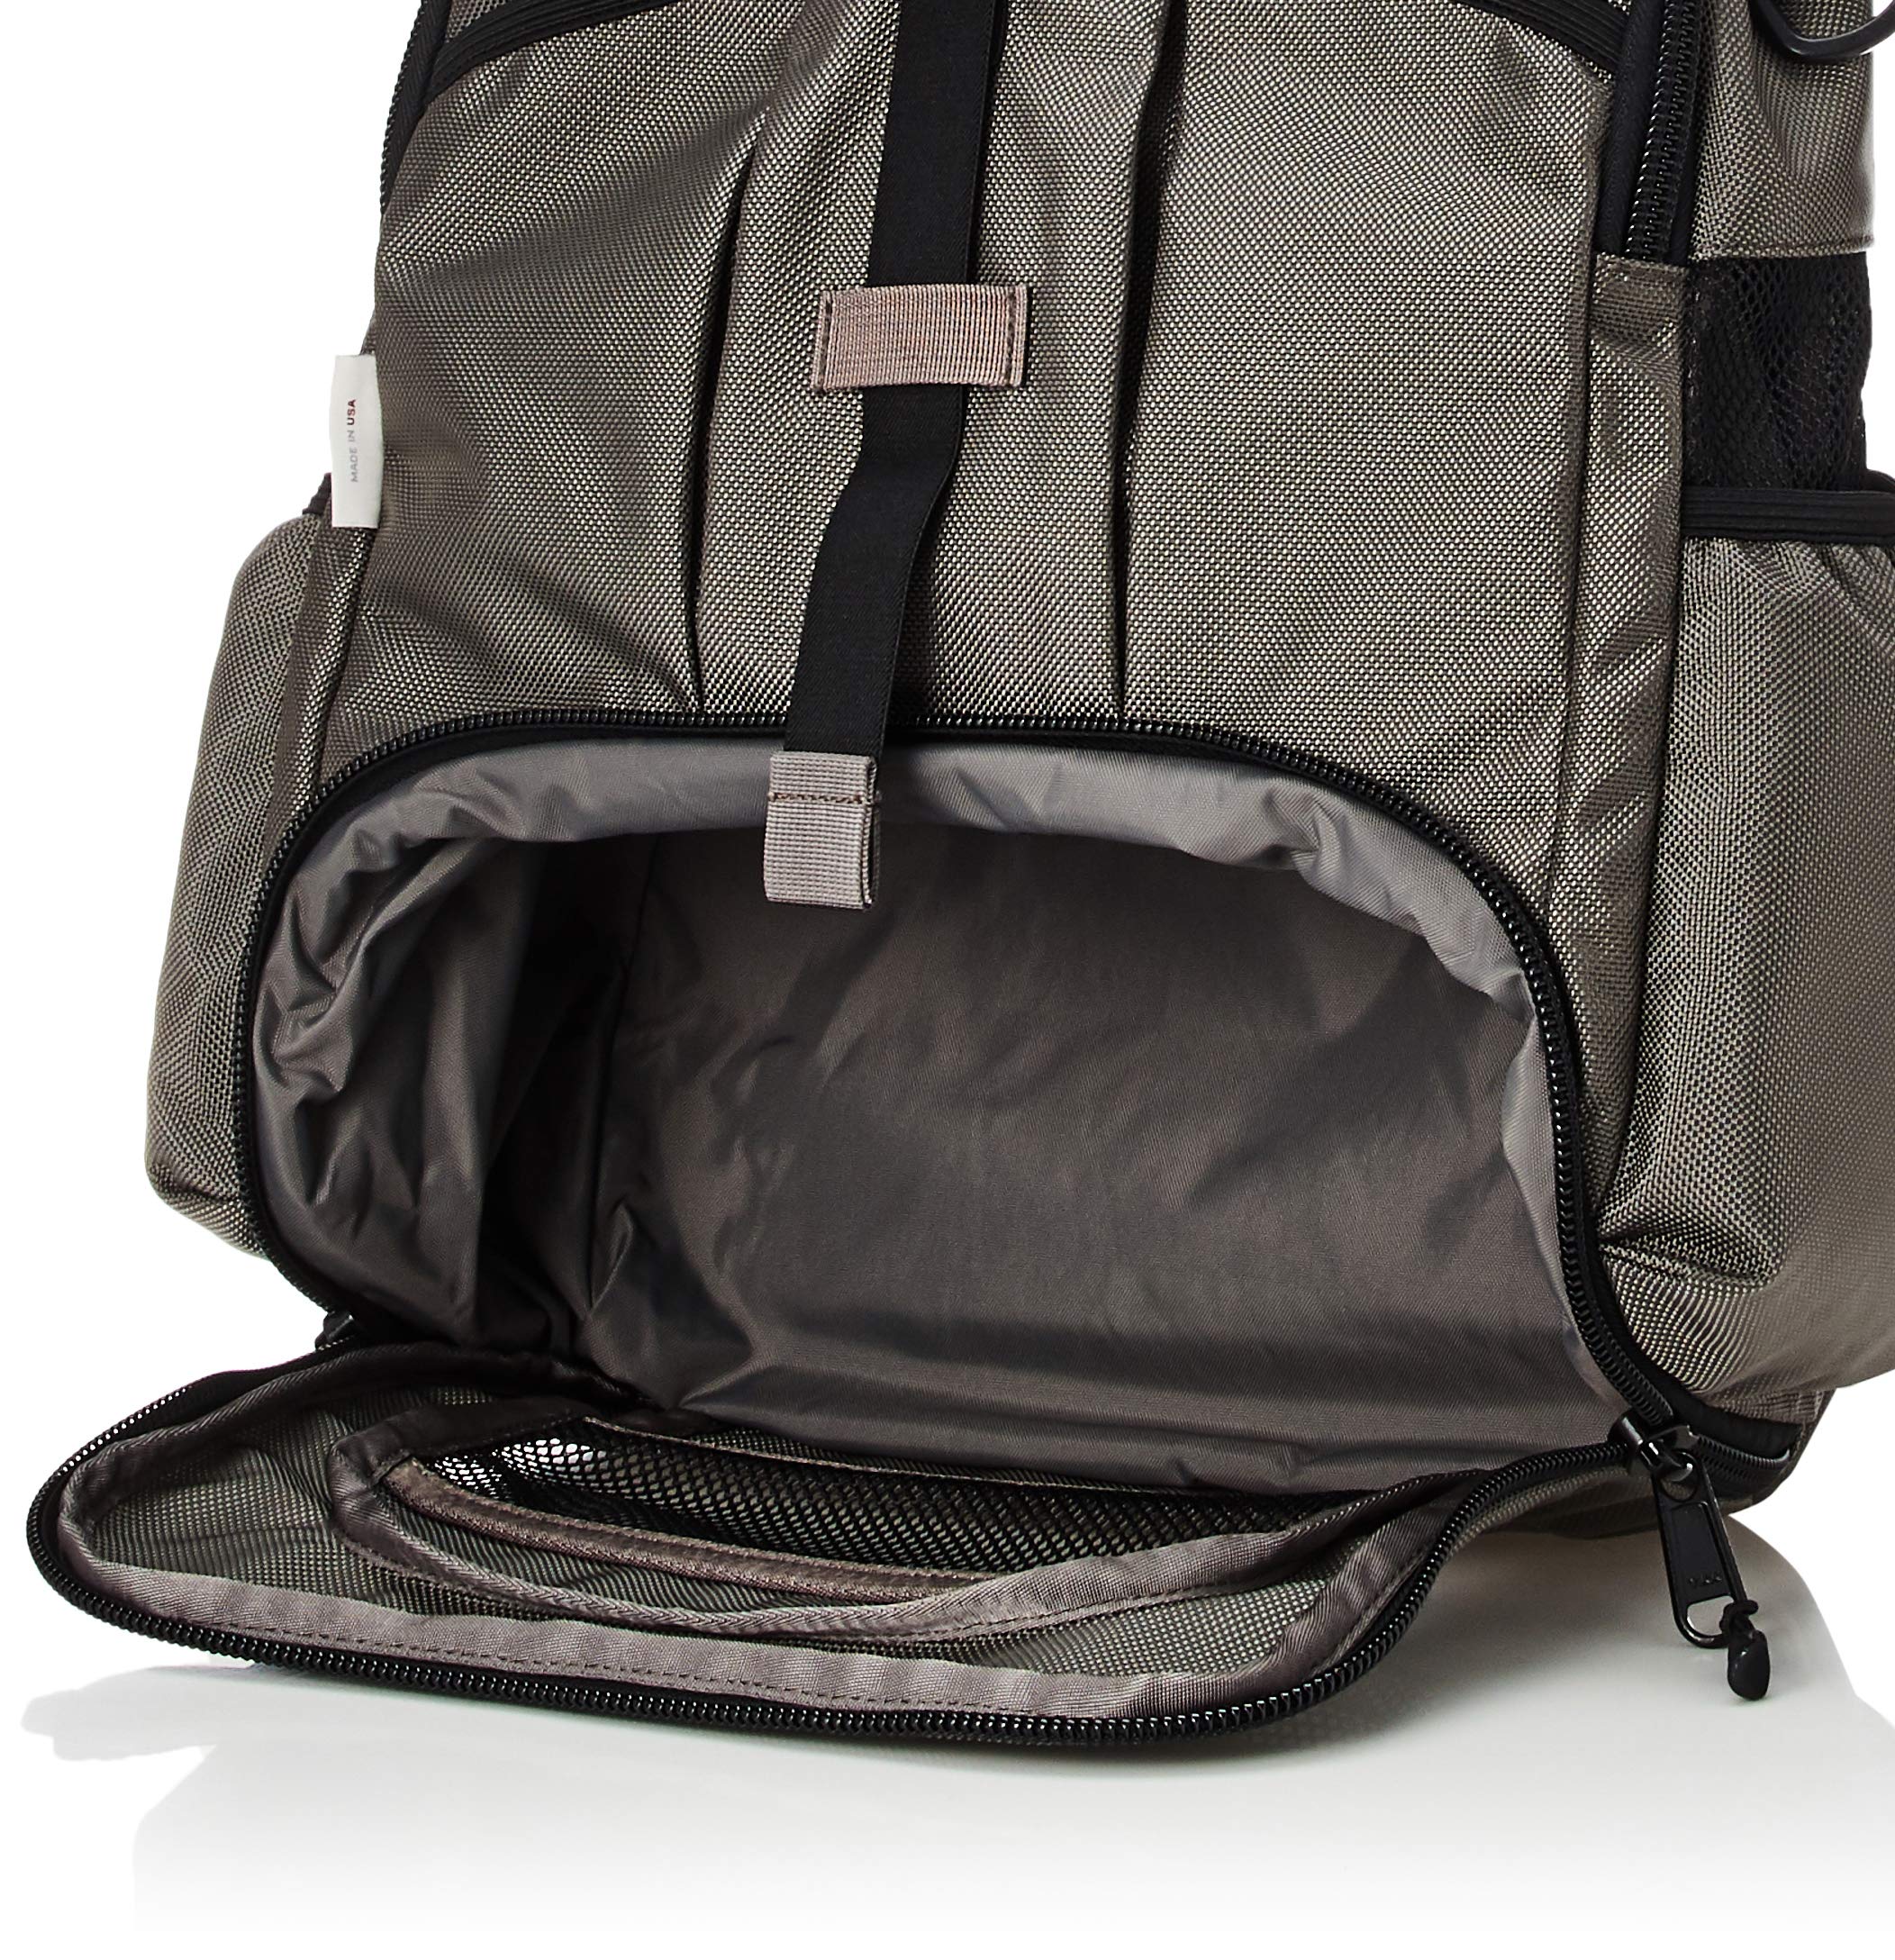 DSPTCH(ディスパッチ) Dispatch 73026 Men's Backpack, Sports Backpack, Gray